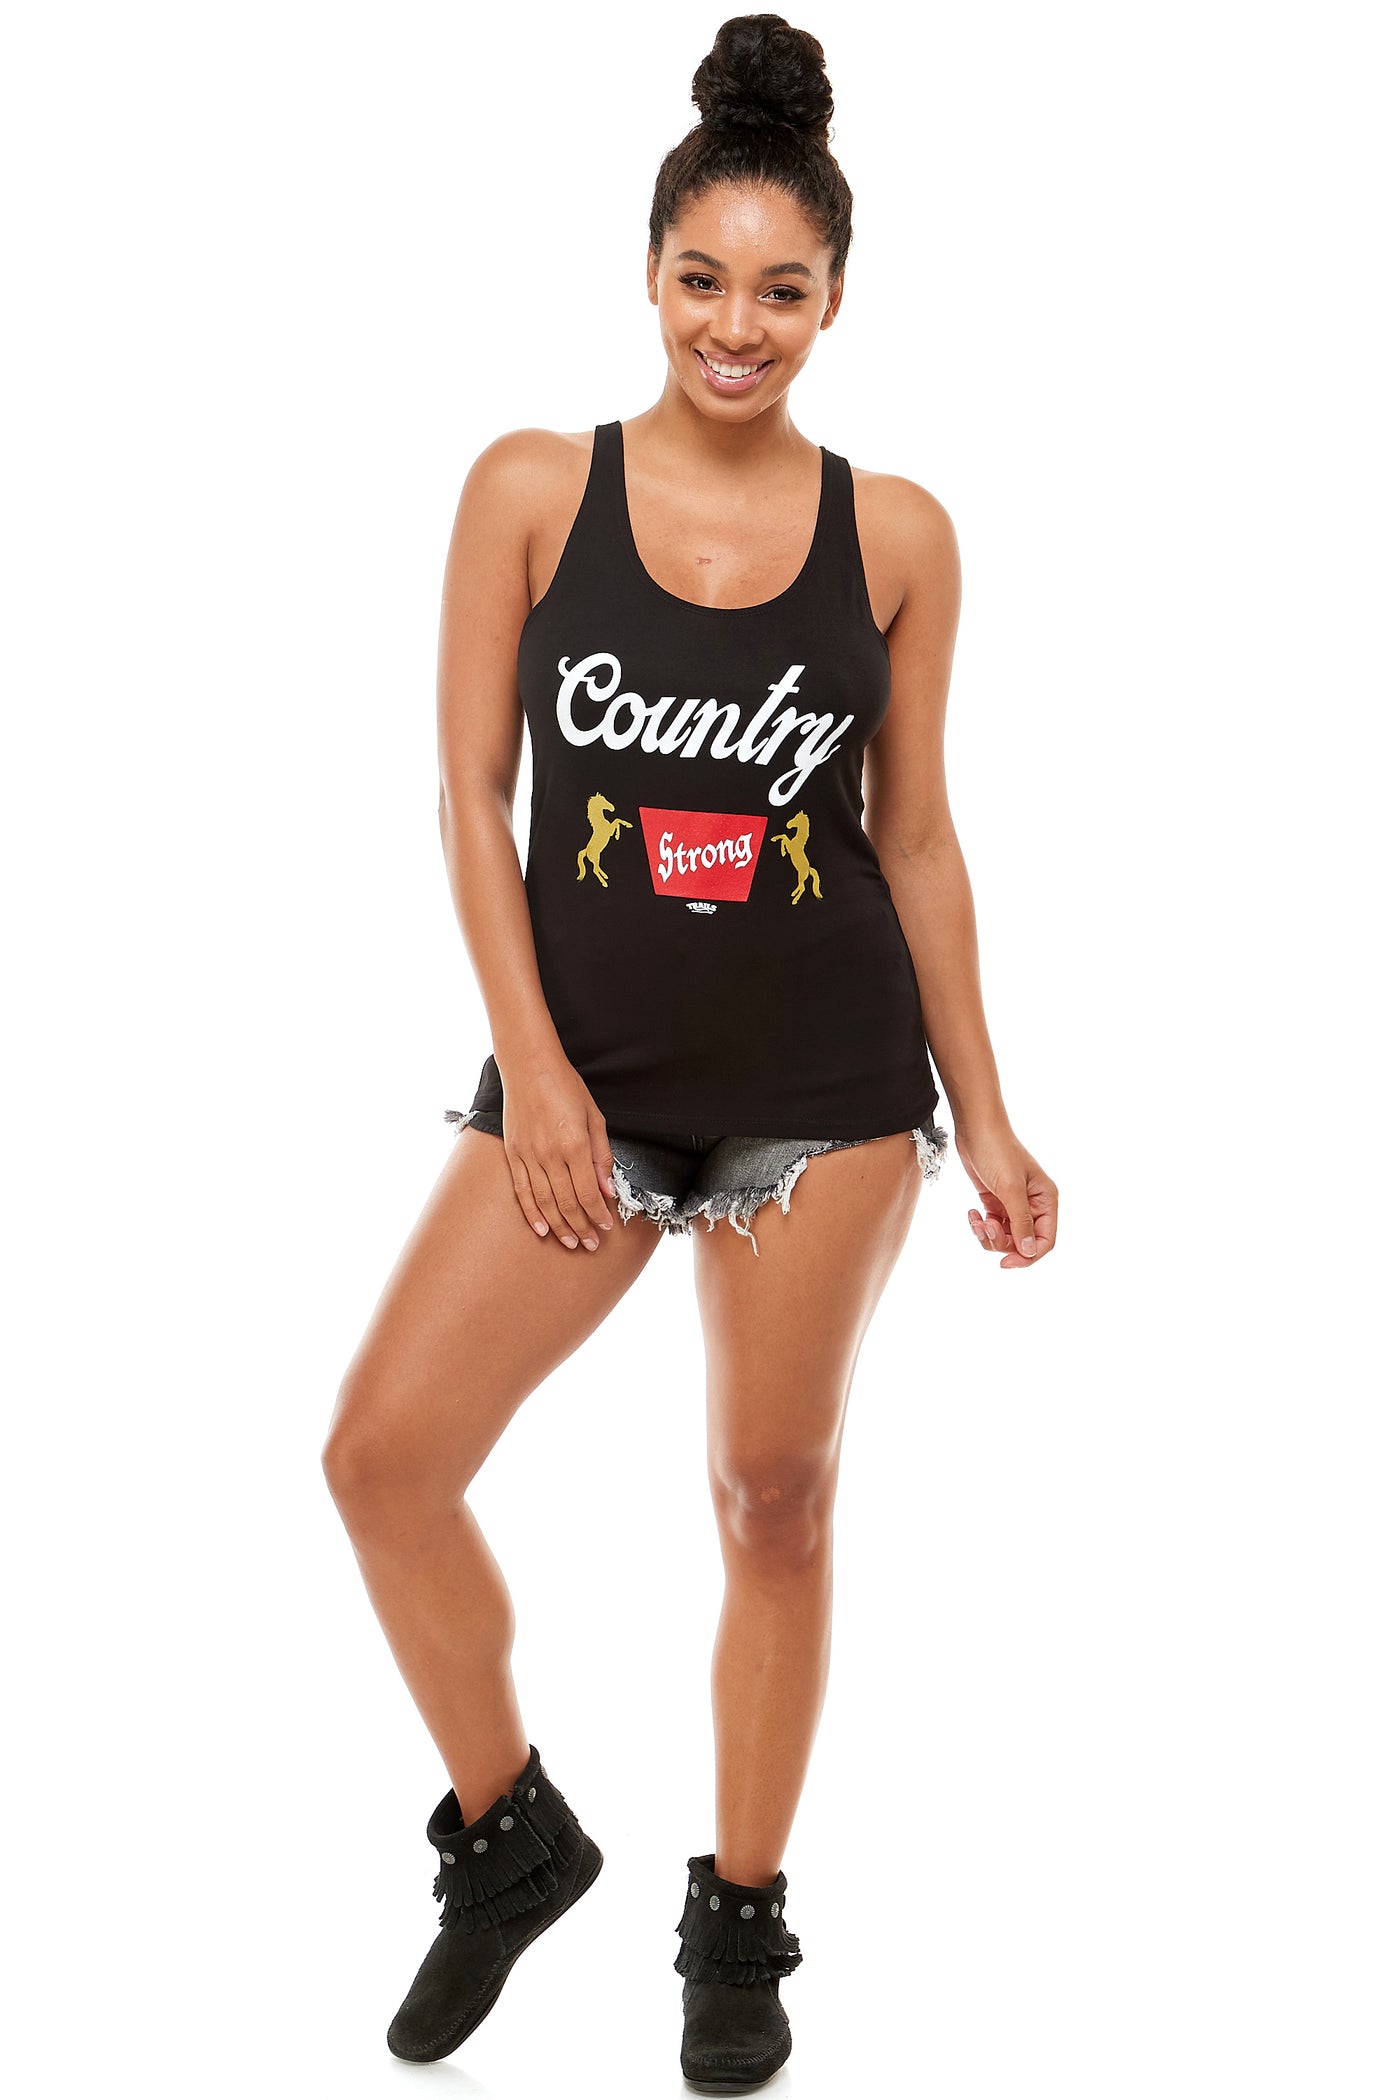 RACER BACK BANQUET COUNTRY STRONG TANK